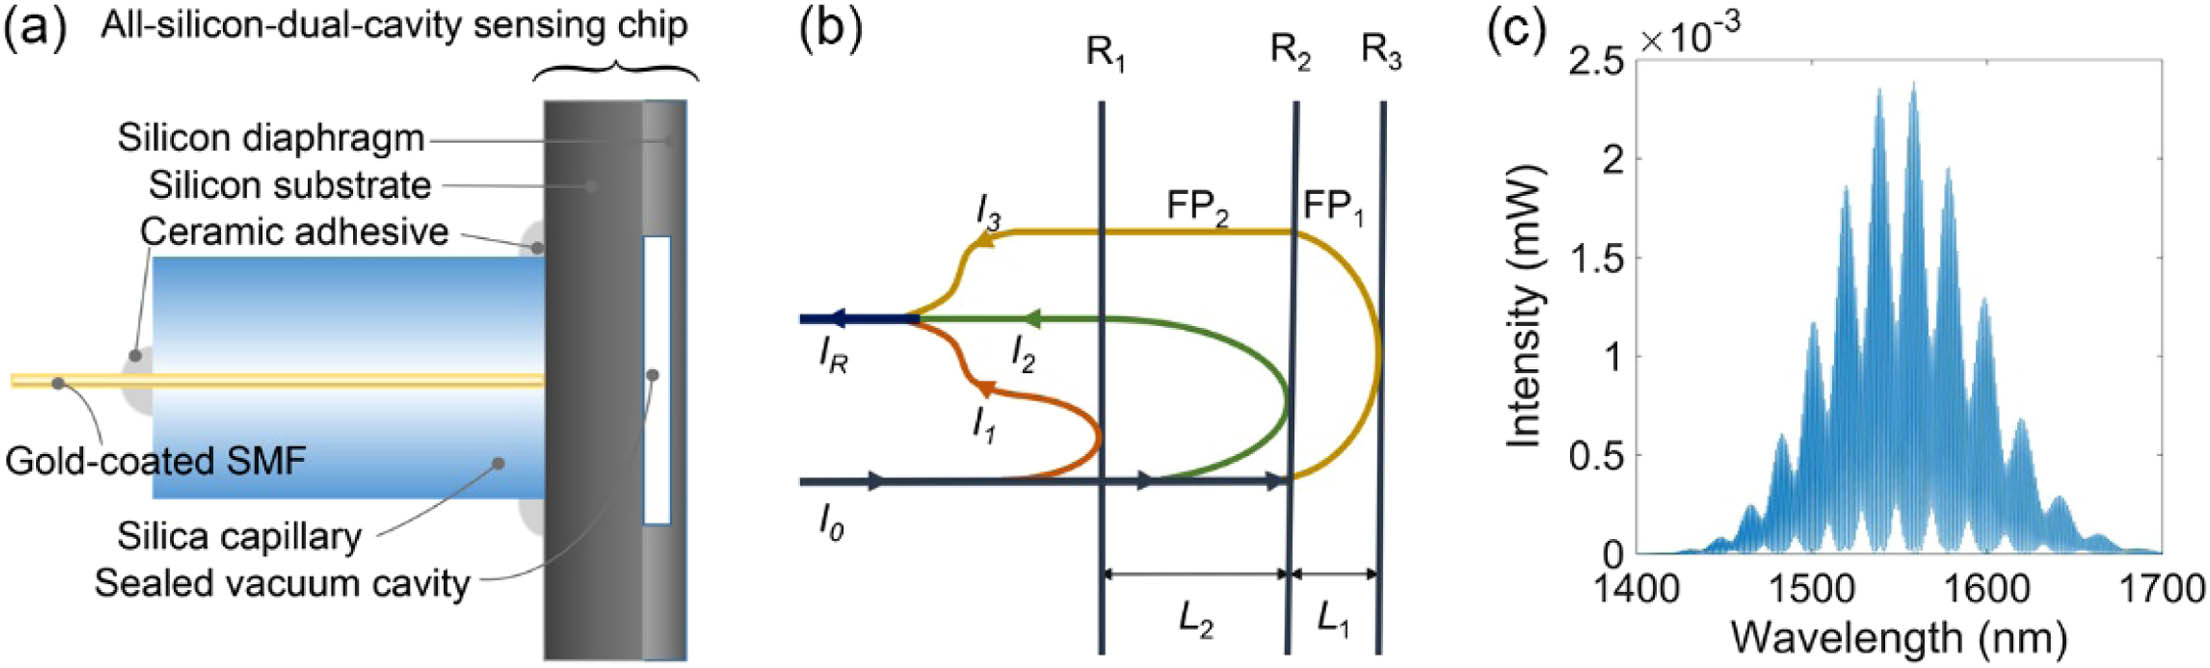 (a) Schematic diagram of the all-silicon-based dual-cavity fiber-optic pressure sensor structure. (All the components are high-temperature resistant materials.) (b) Interference model of the dual-cavity structure with three reflective mirrors; (c) simulation of reflected spectra IR(λ). (Simulation parameters: n1=1, n2=3.47, L1=60 μm, L2=300 μm, I0 is a broadband light source with a central wavelength of 1550 nm.)